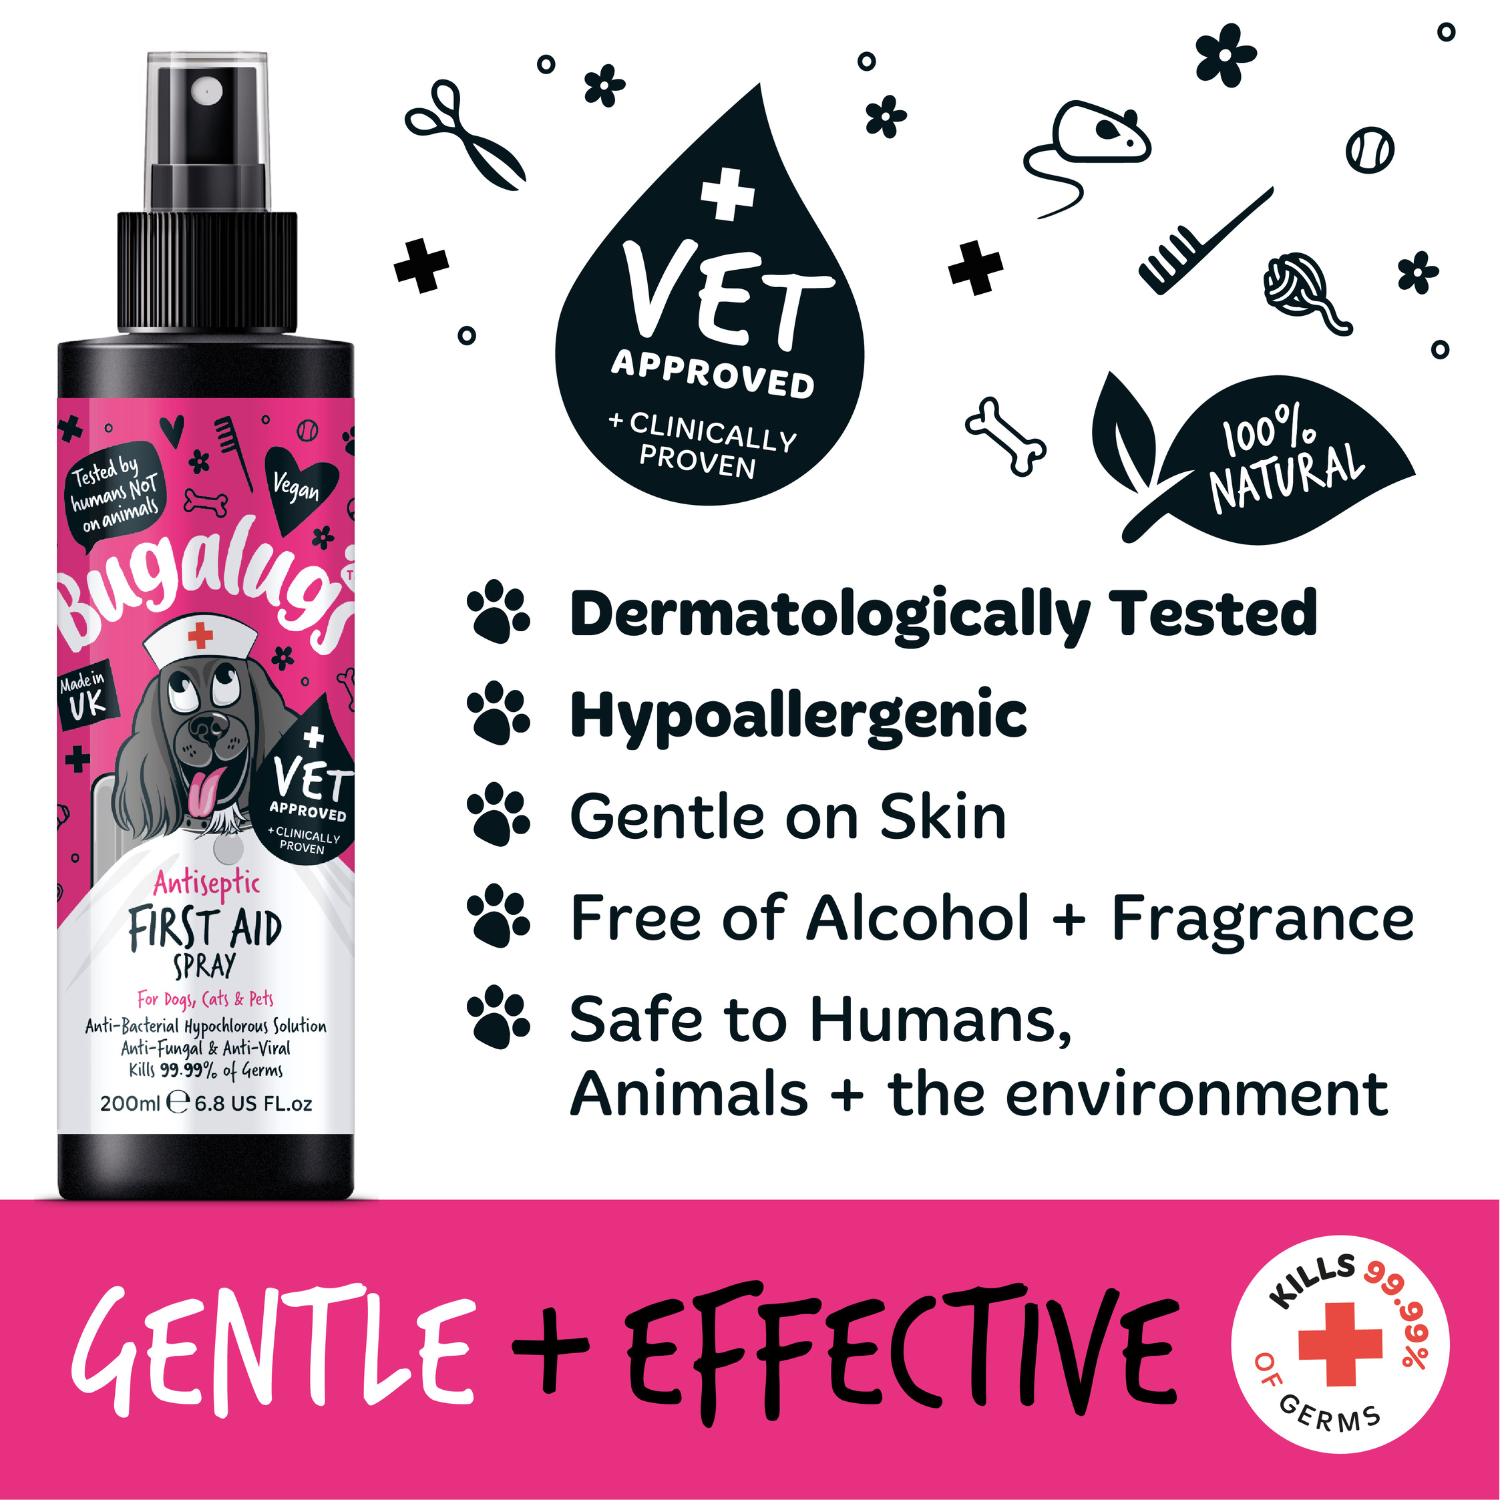 Bugalugs Antiseptic First Aid Spray for Dogs, Cats and Pets - Key benefits